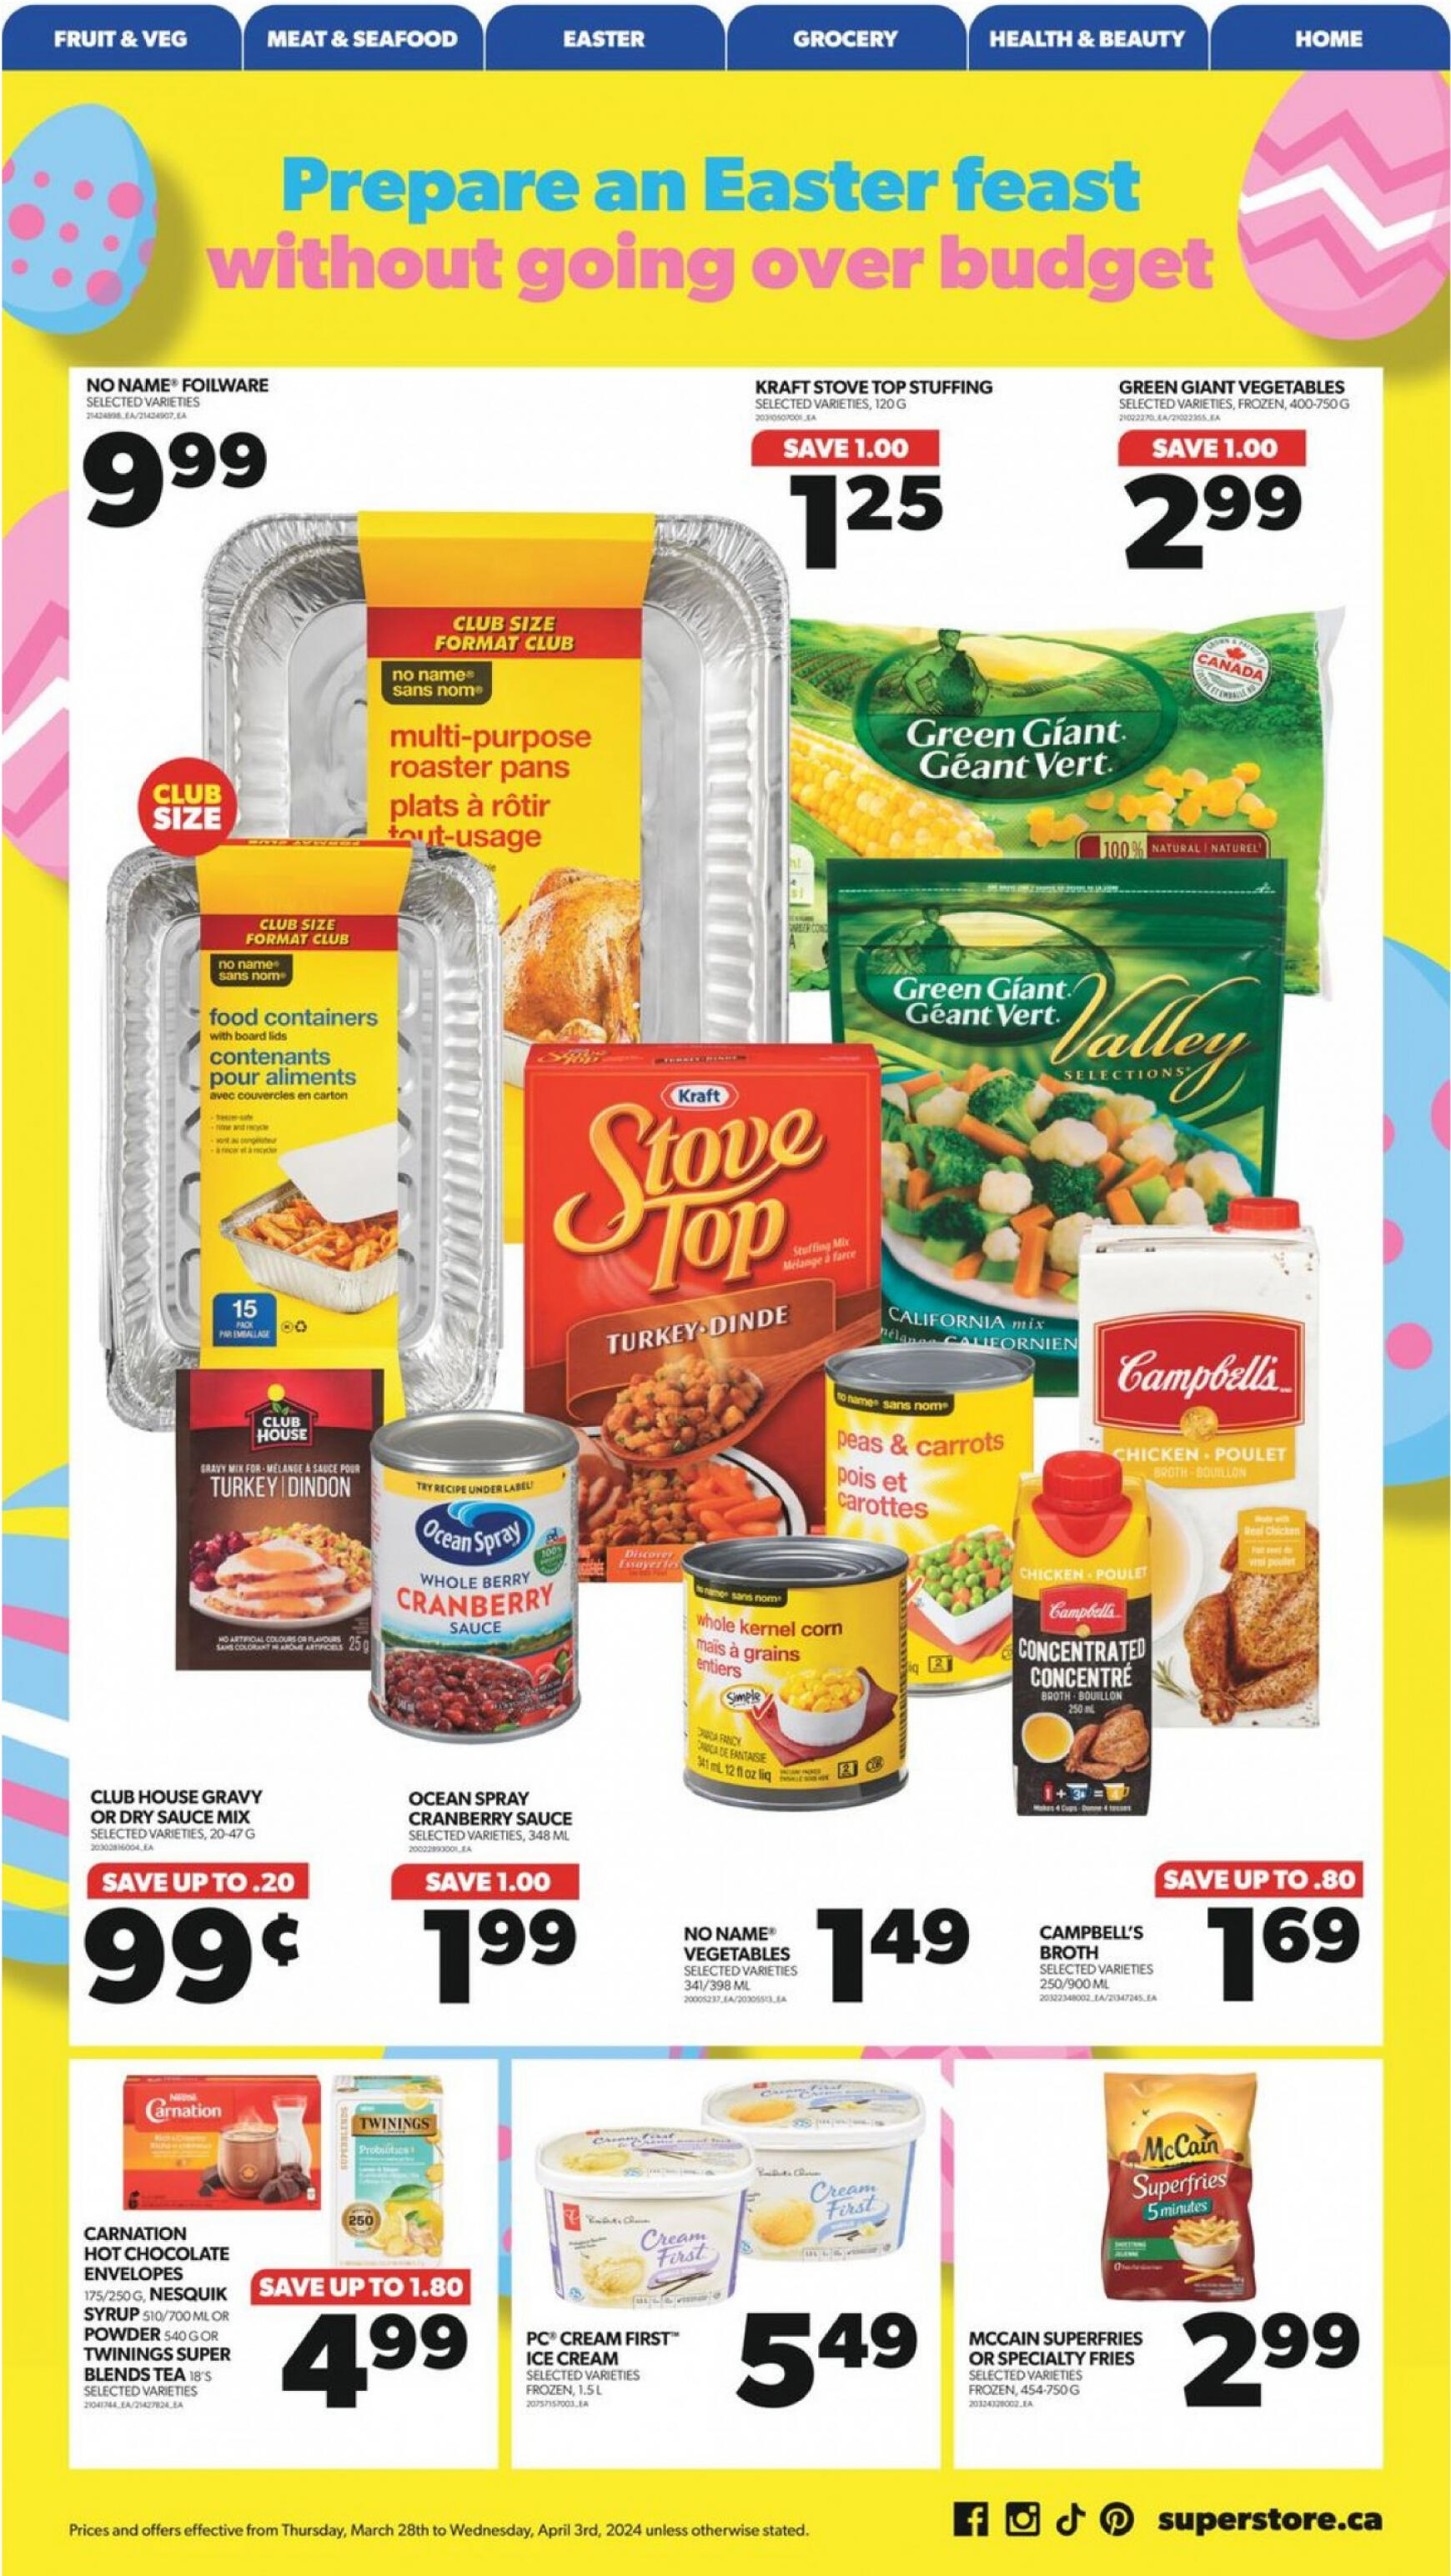 real-canadian-superstore - Real Canadian Superstore flyer current 28.03. - 03.04. - page: 8